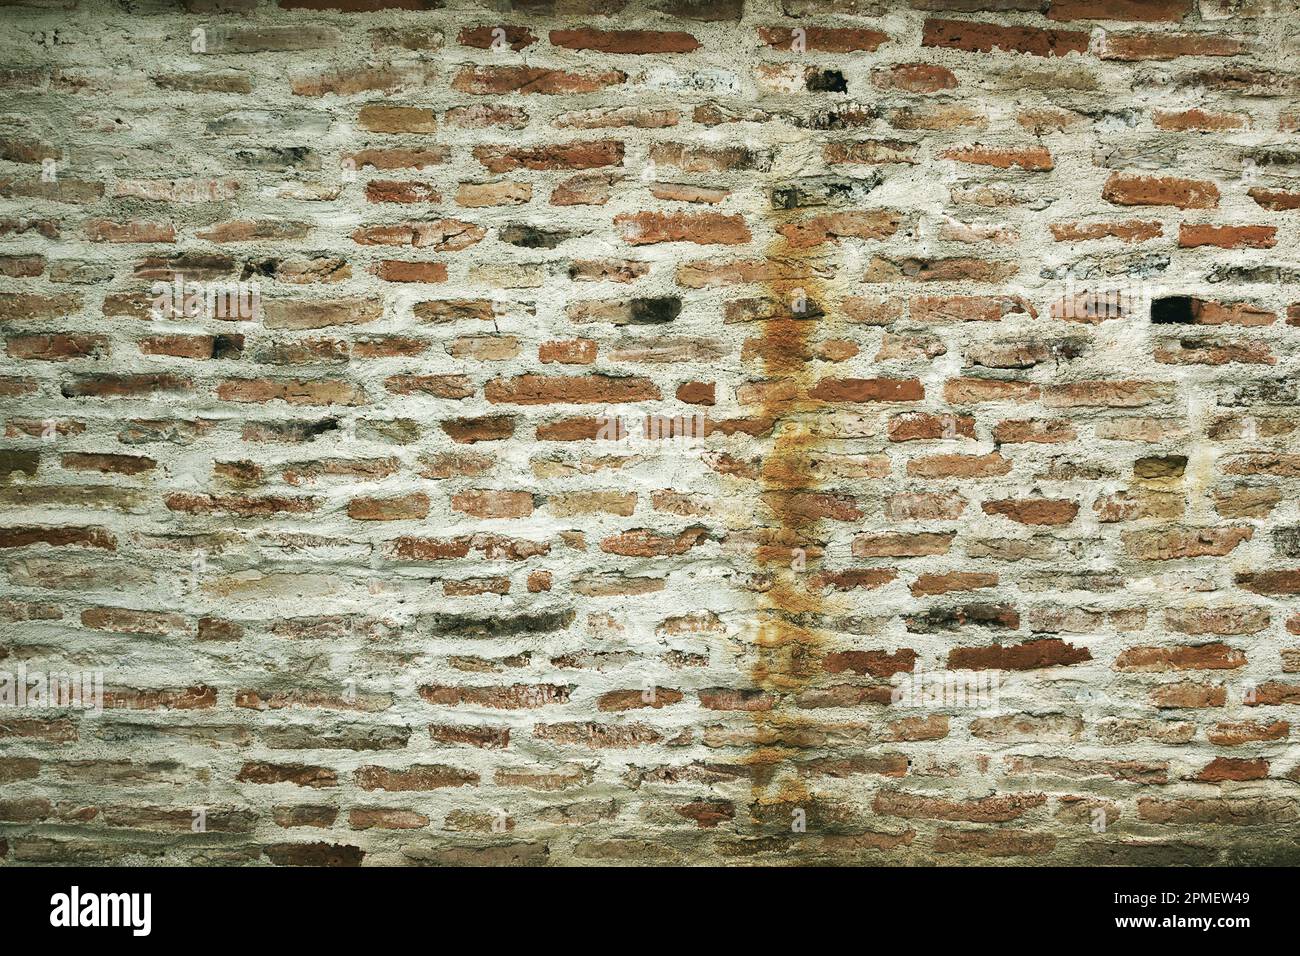 rough old brick wall texture ready for your design Stock Photo